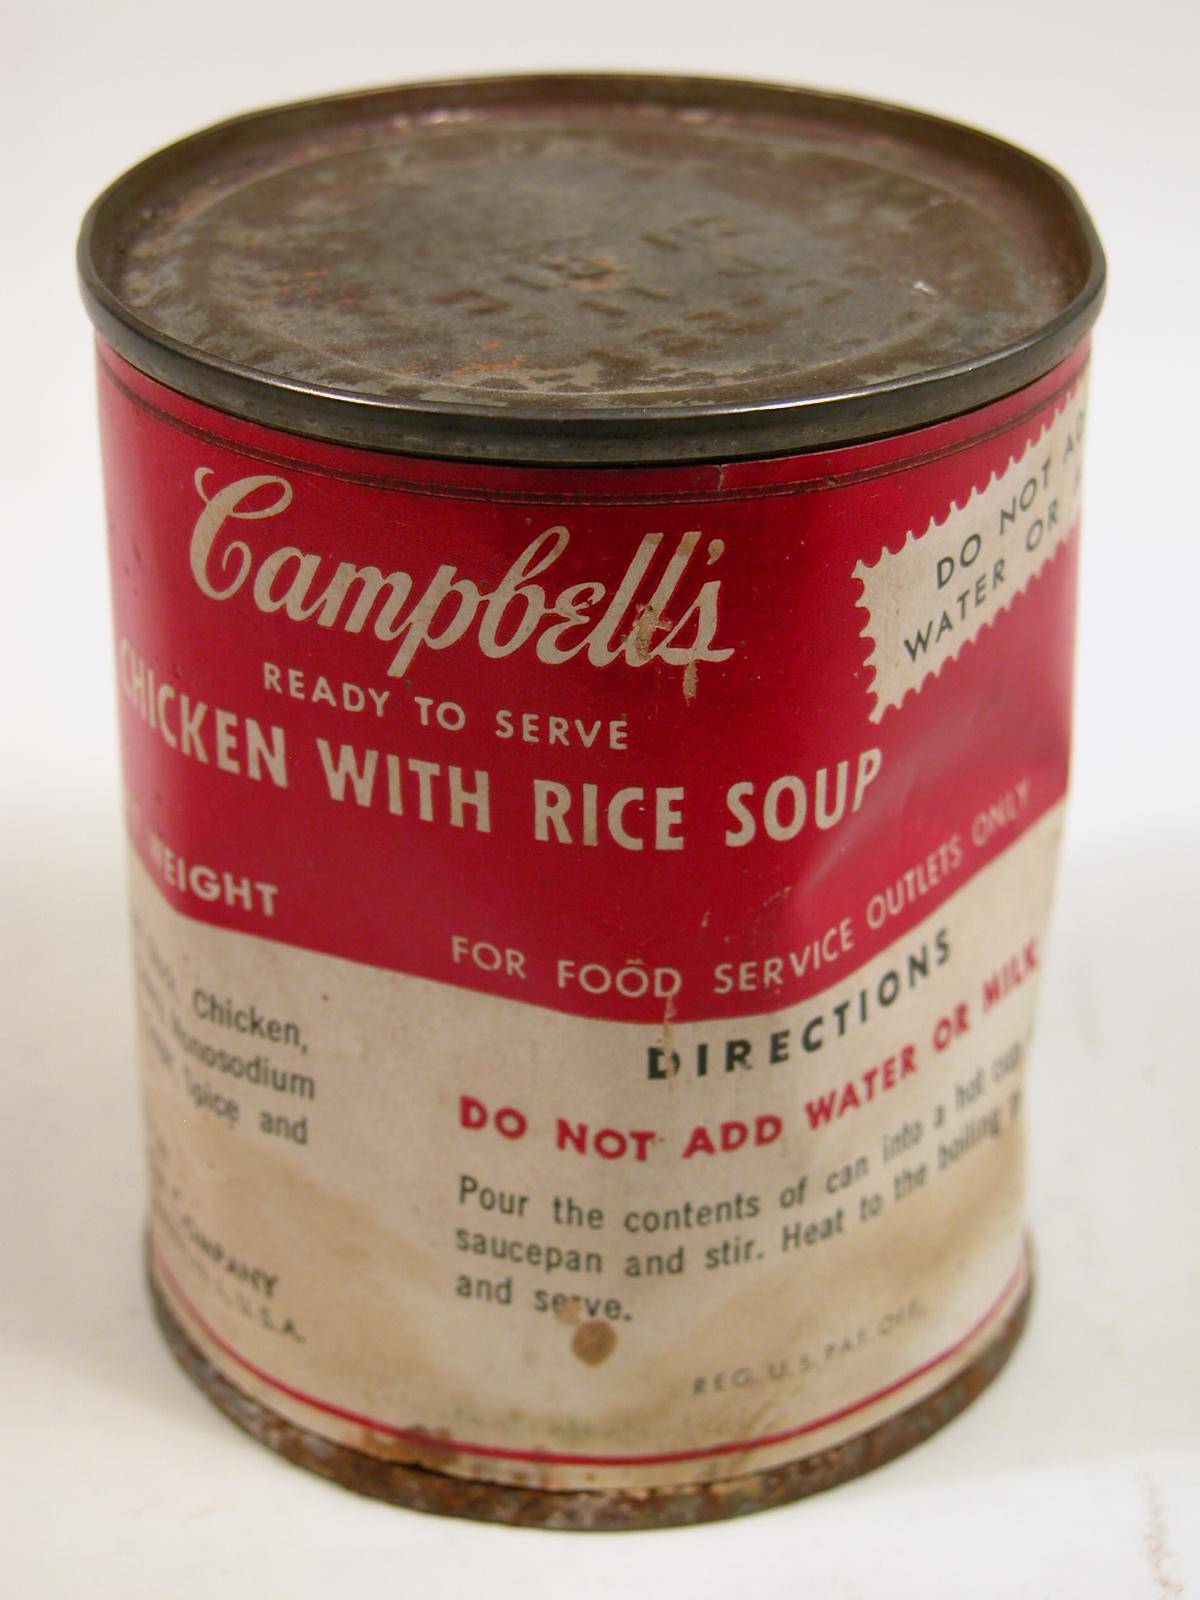 Vintage Signed Campbell's Soup Can from 1964 Bianchini Gallery Exhibition - Pop Art Art by Andy Warhol